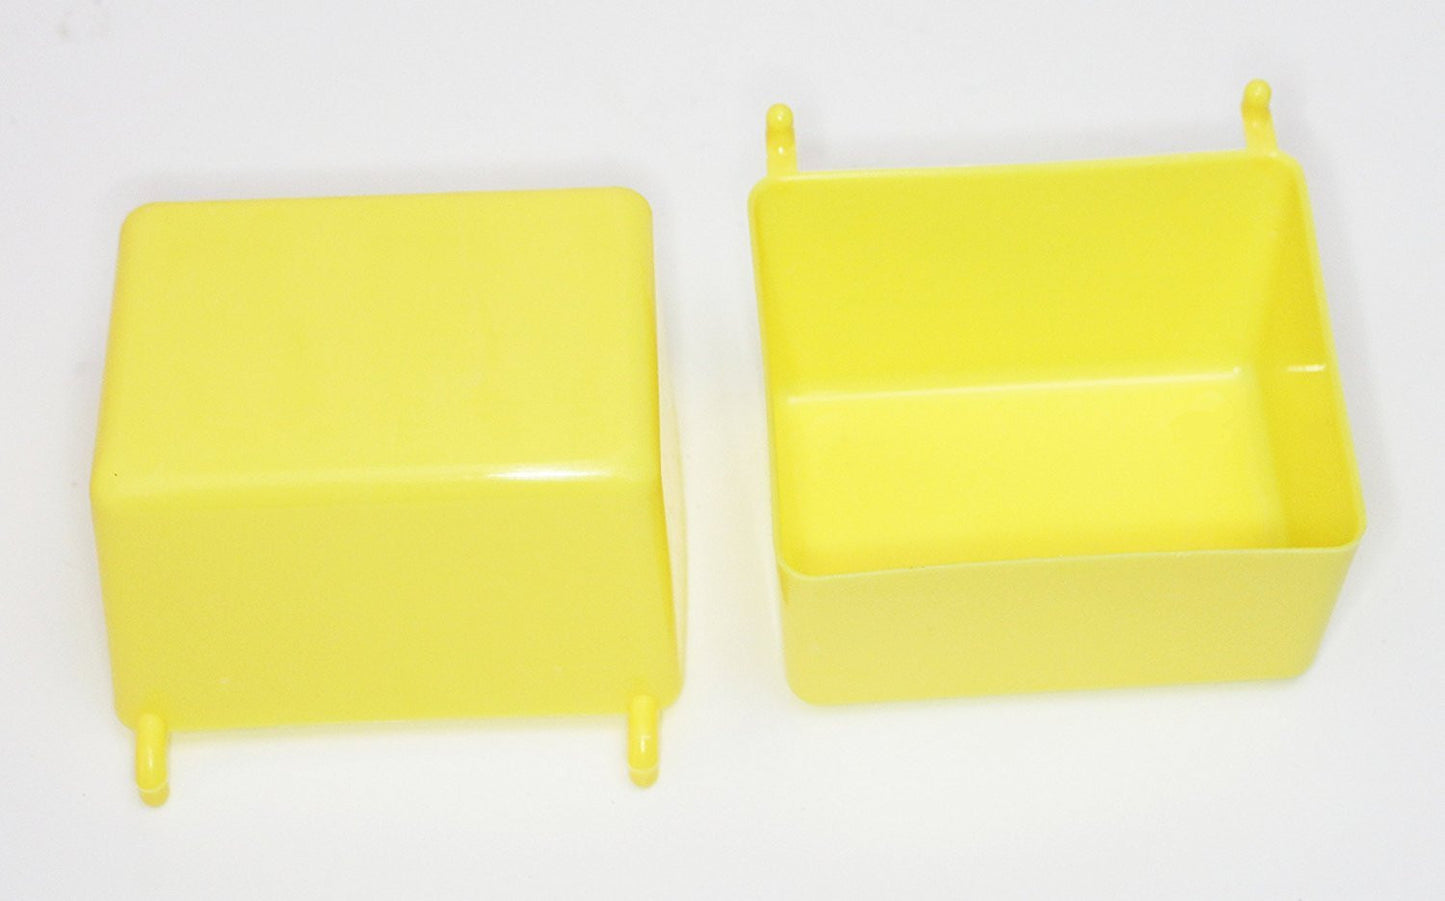 Small Plastic Yellow Pegboard Storage / Parts Bins -Heavy duty -10 Pack